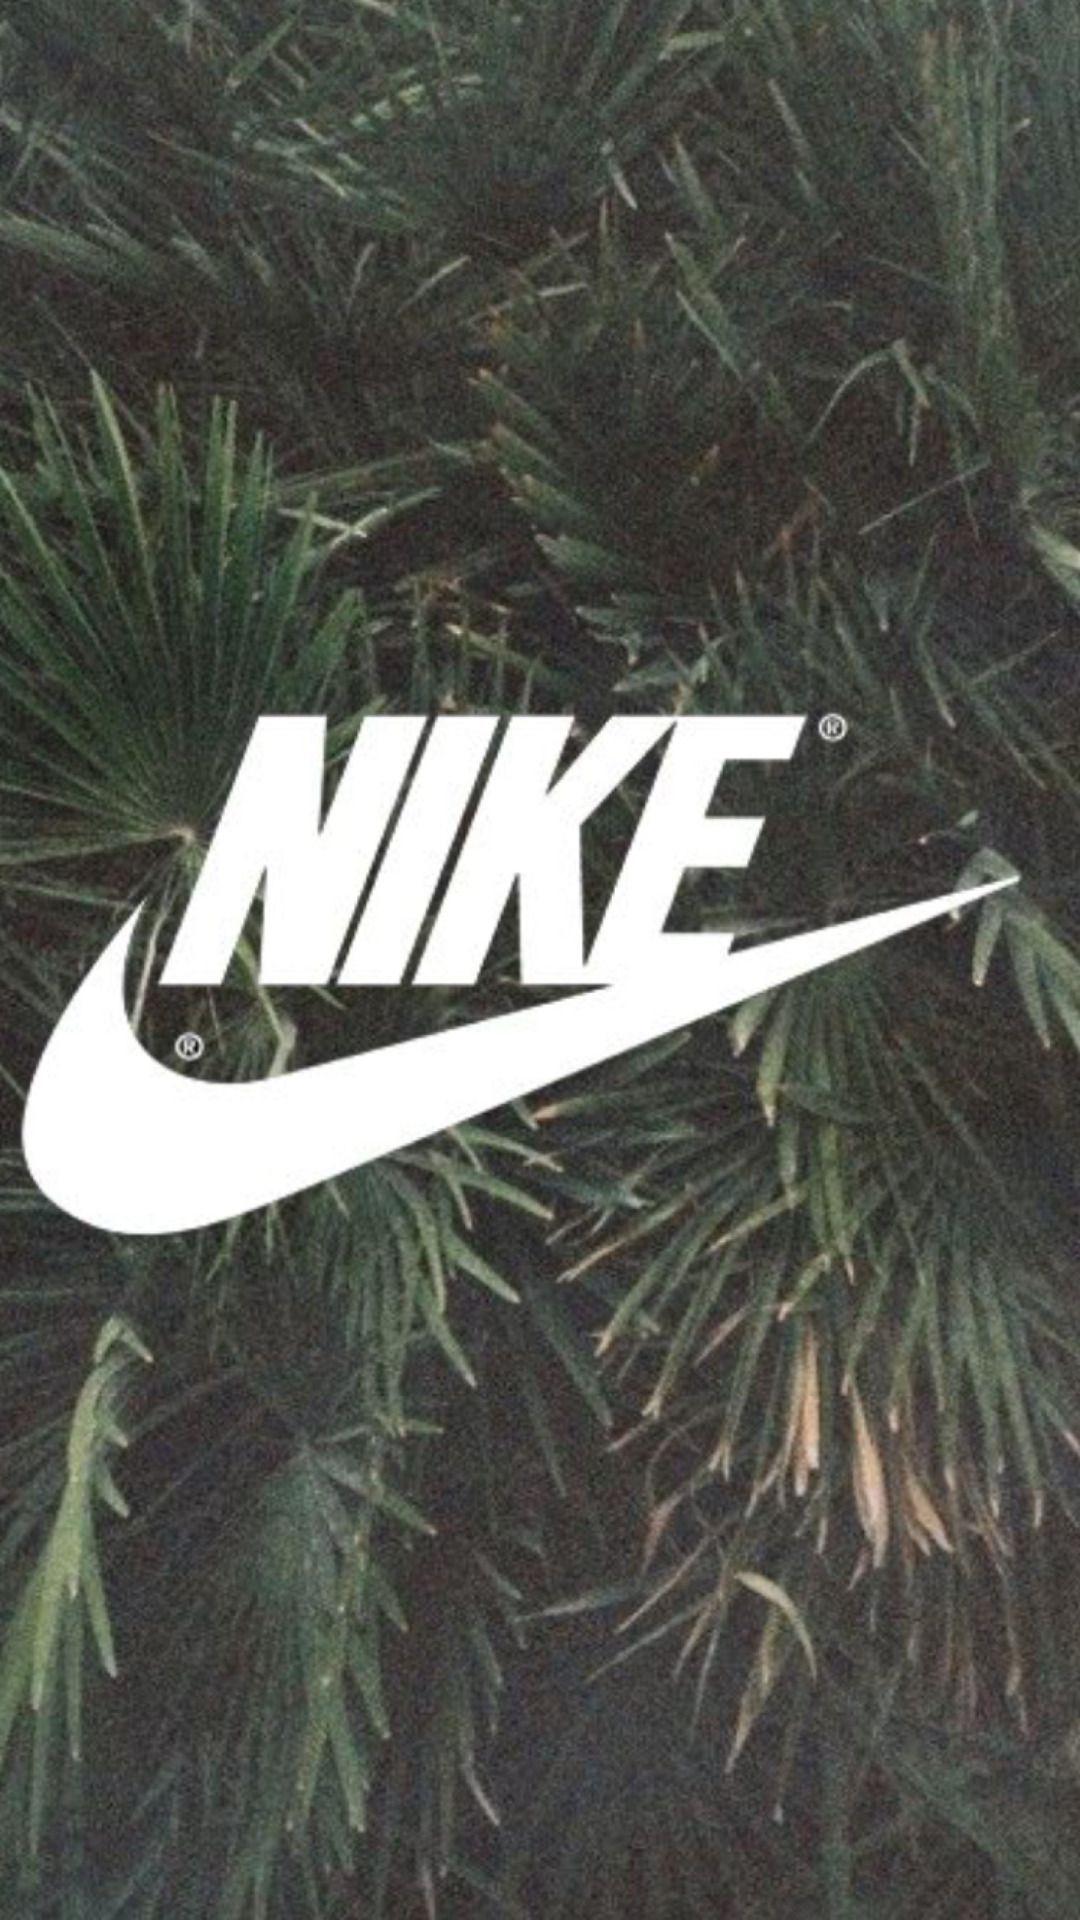 Nike Iphone wallpaper, For more Nike Iphone wallpapers - Cl…